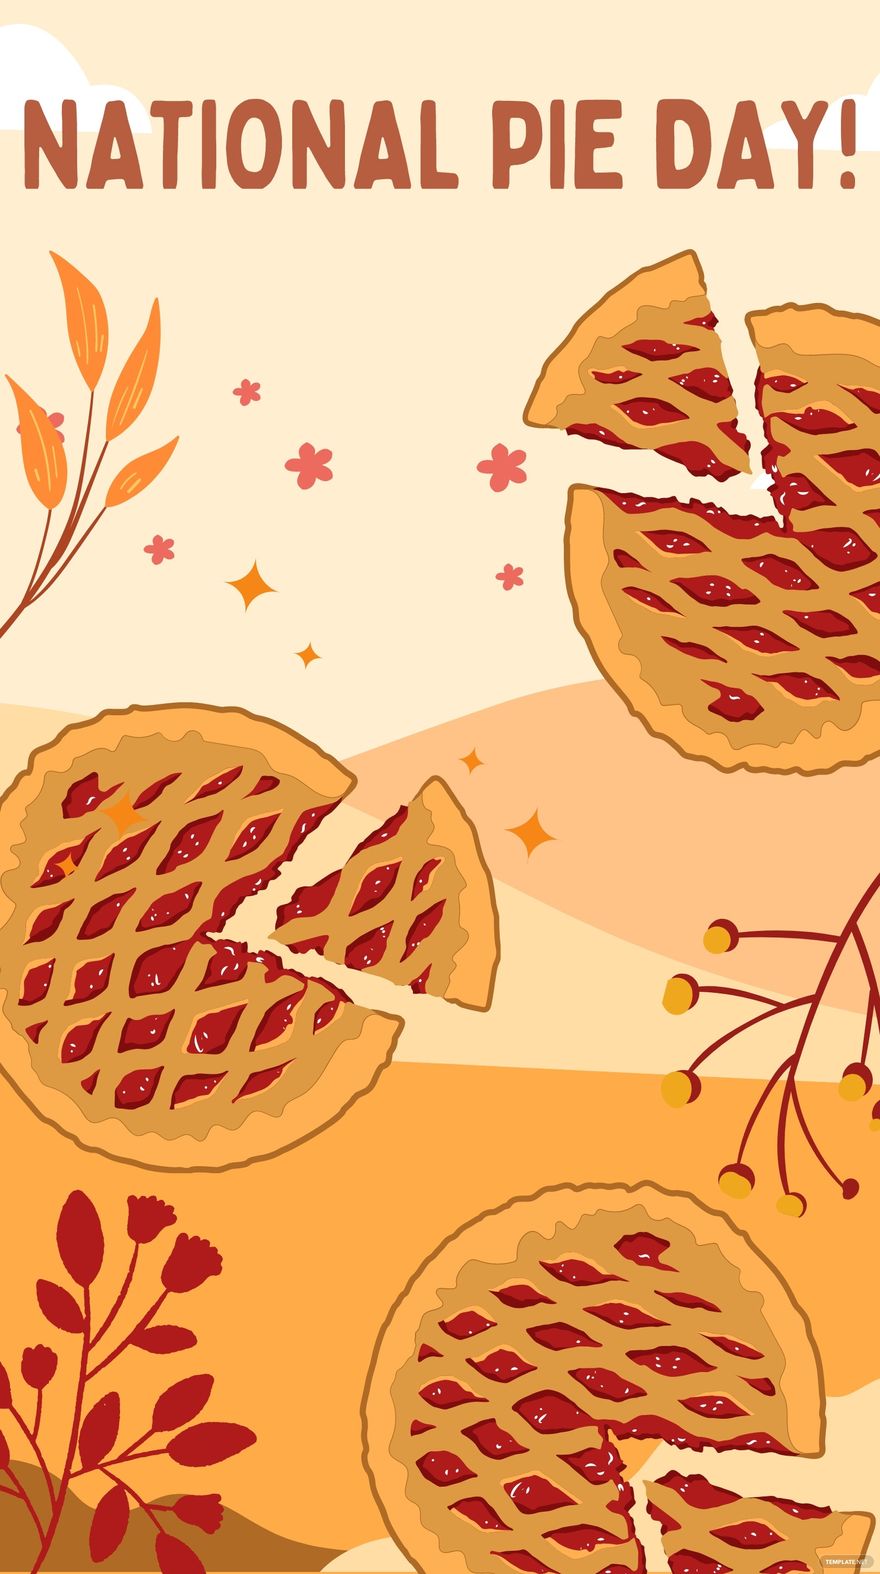 Free National Pie Day iPhone Background in PDF, Illustrator, PSD, EPS, SVG, JPG, PNG